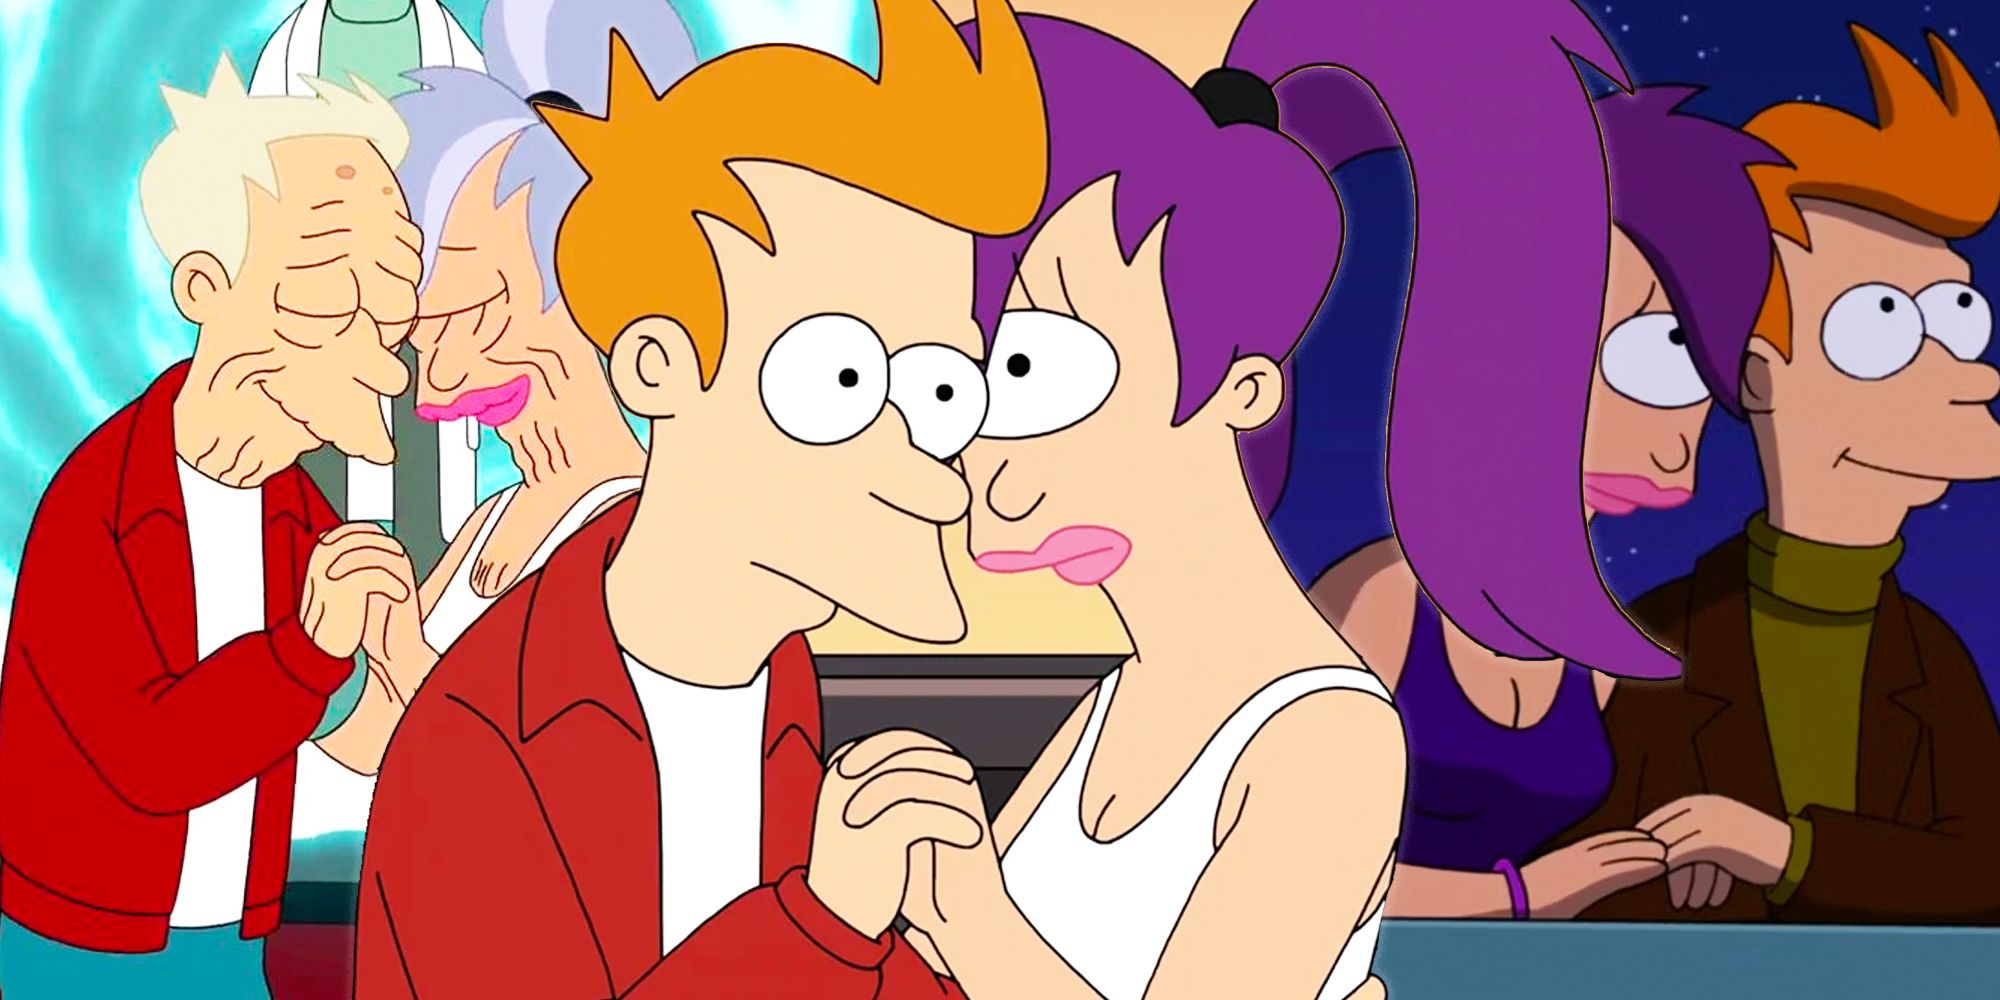 Fry and Leela's relationship in Futuram